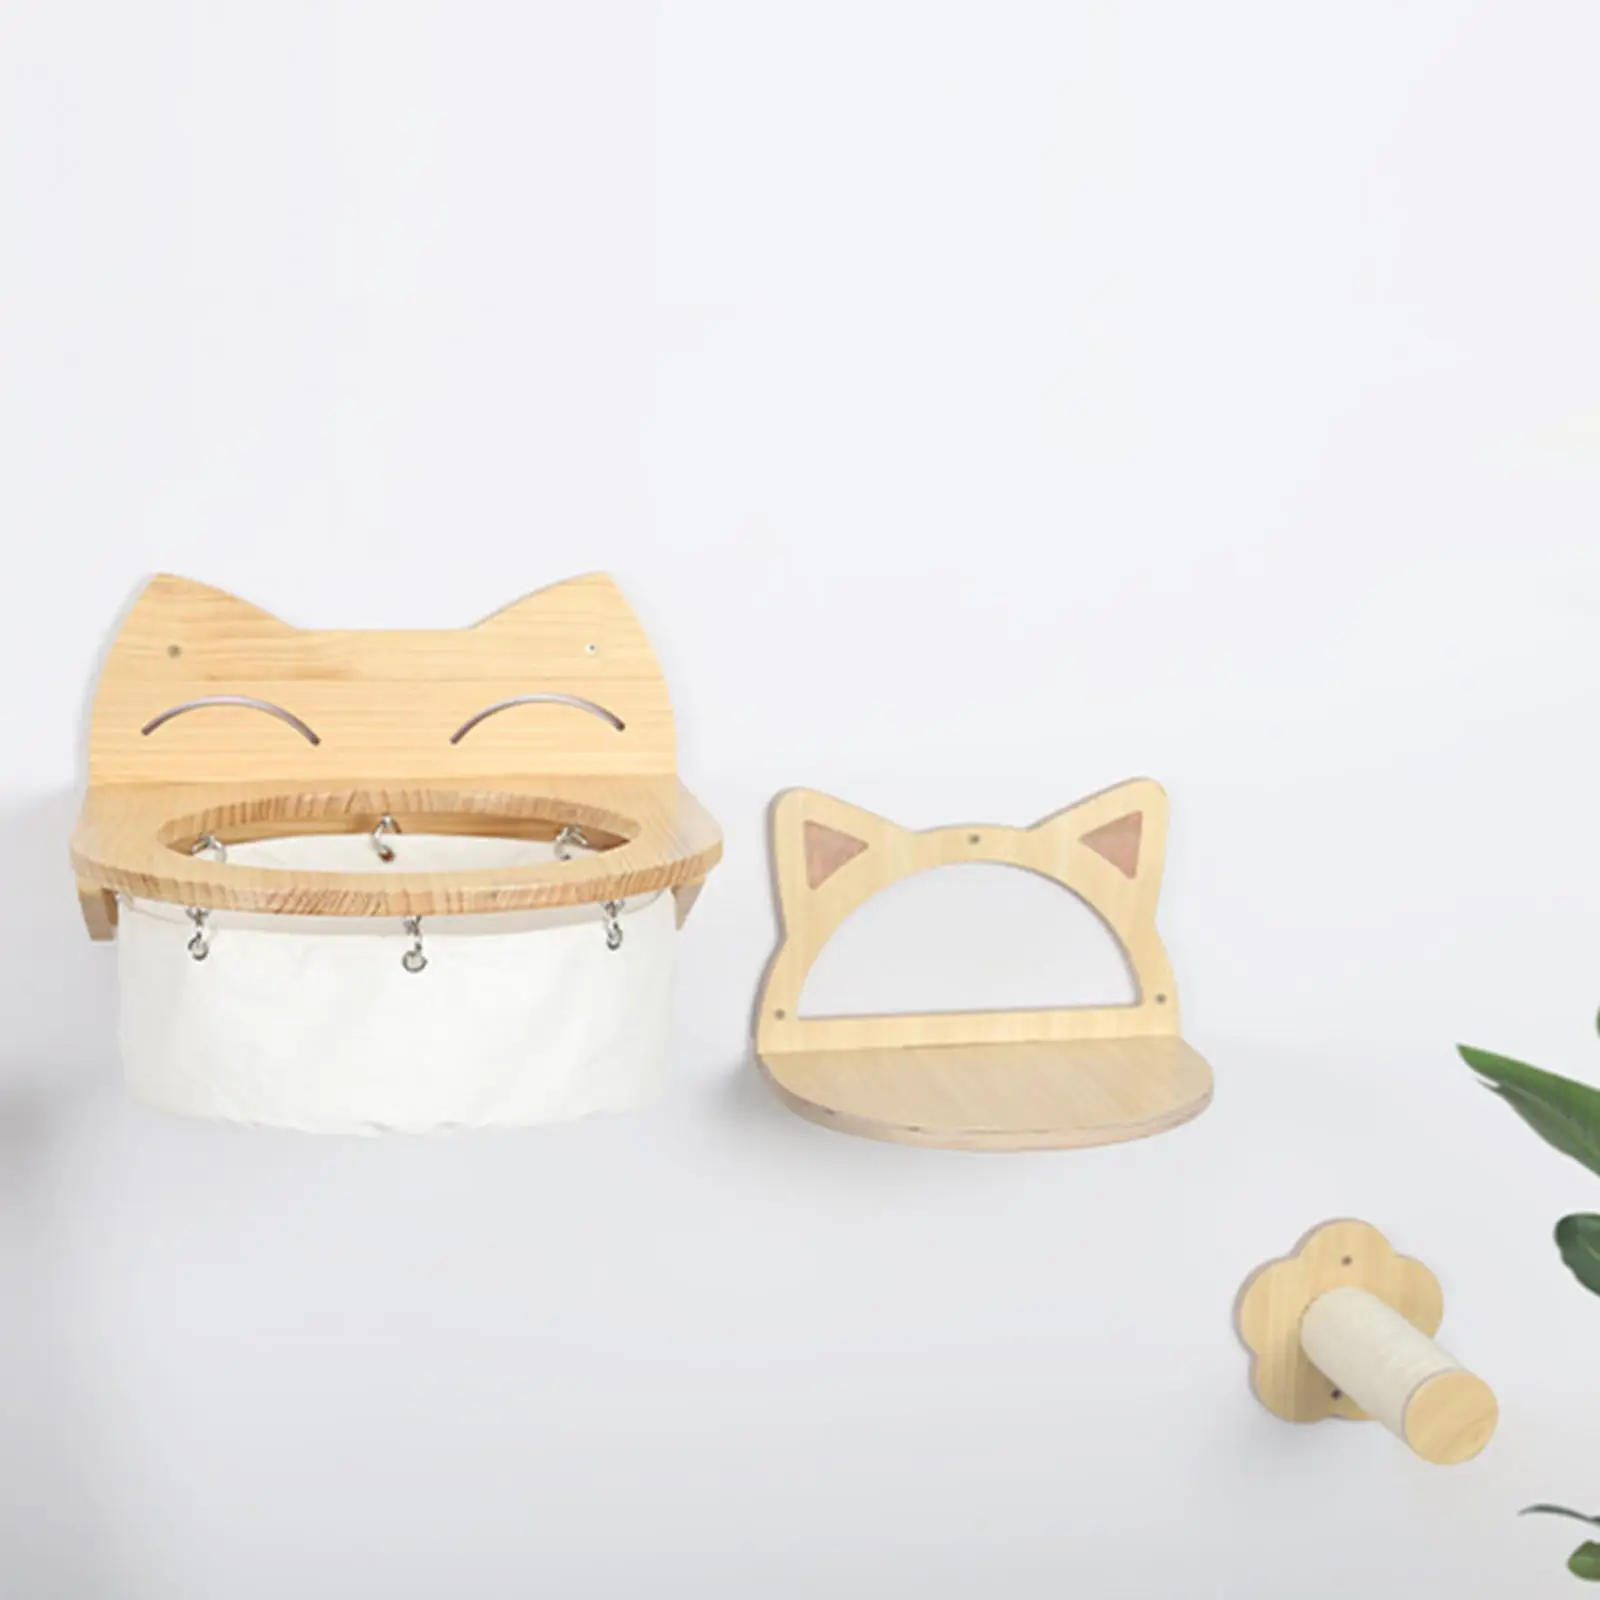 3x Kitten Wall Bed Cat Hammock Perches Wall Mounted for Sleeping Playing Climbing Lounging Cats Wall Furniture Activity Centre